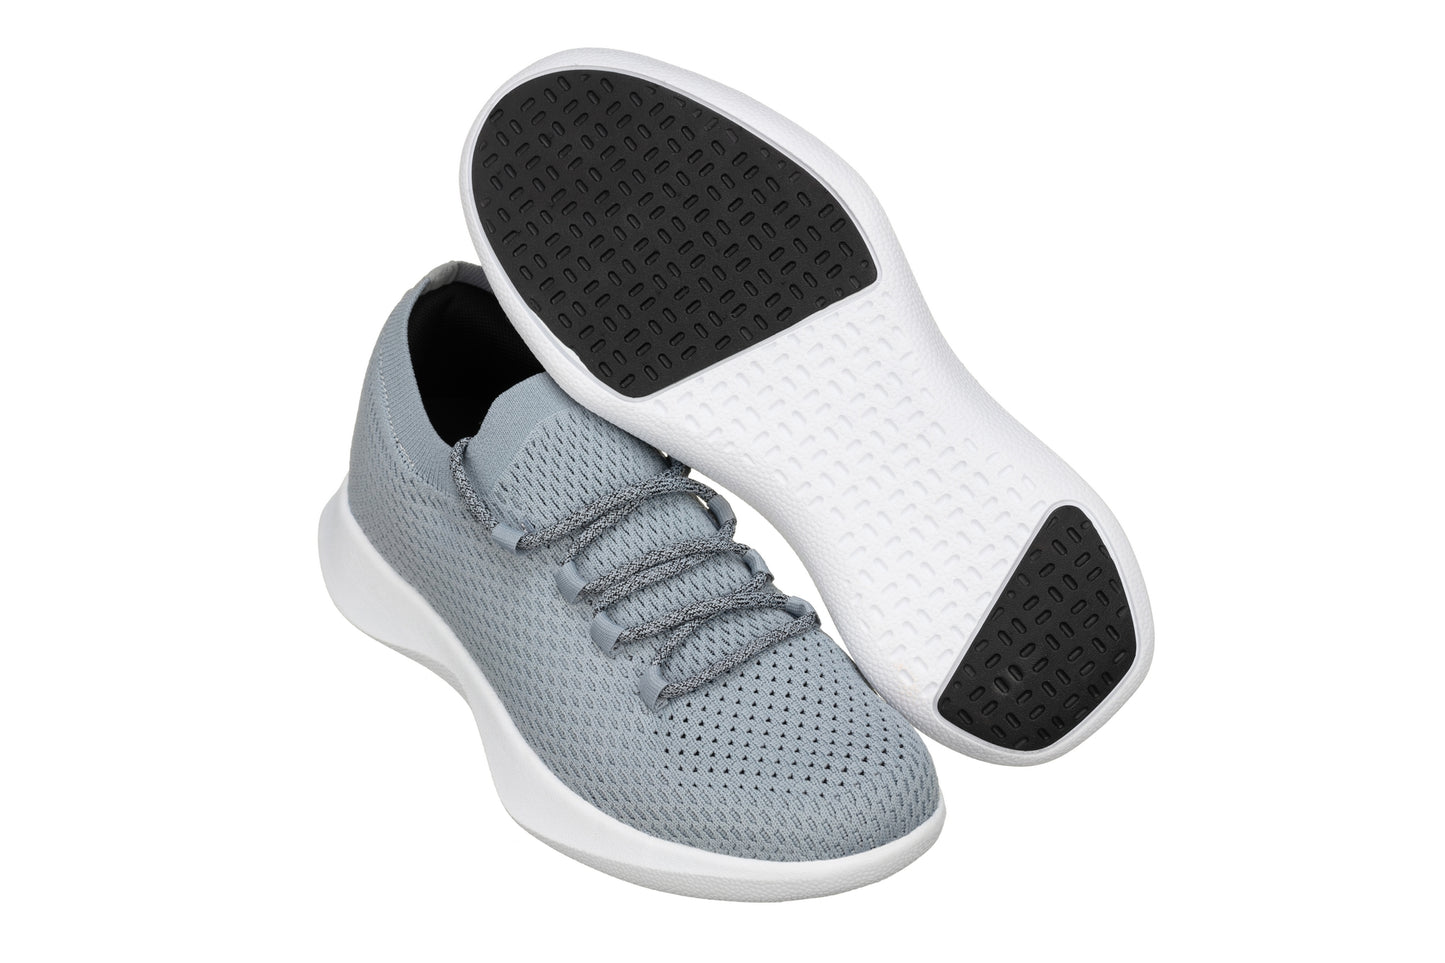 Elevator shoes height increase CALTO - Q086 - 2.4 Inches Taller (Grey/Black) - Ultra Lightweight Sneakers